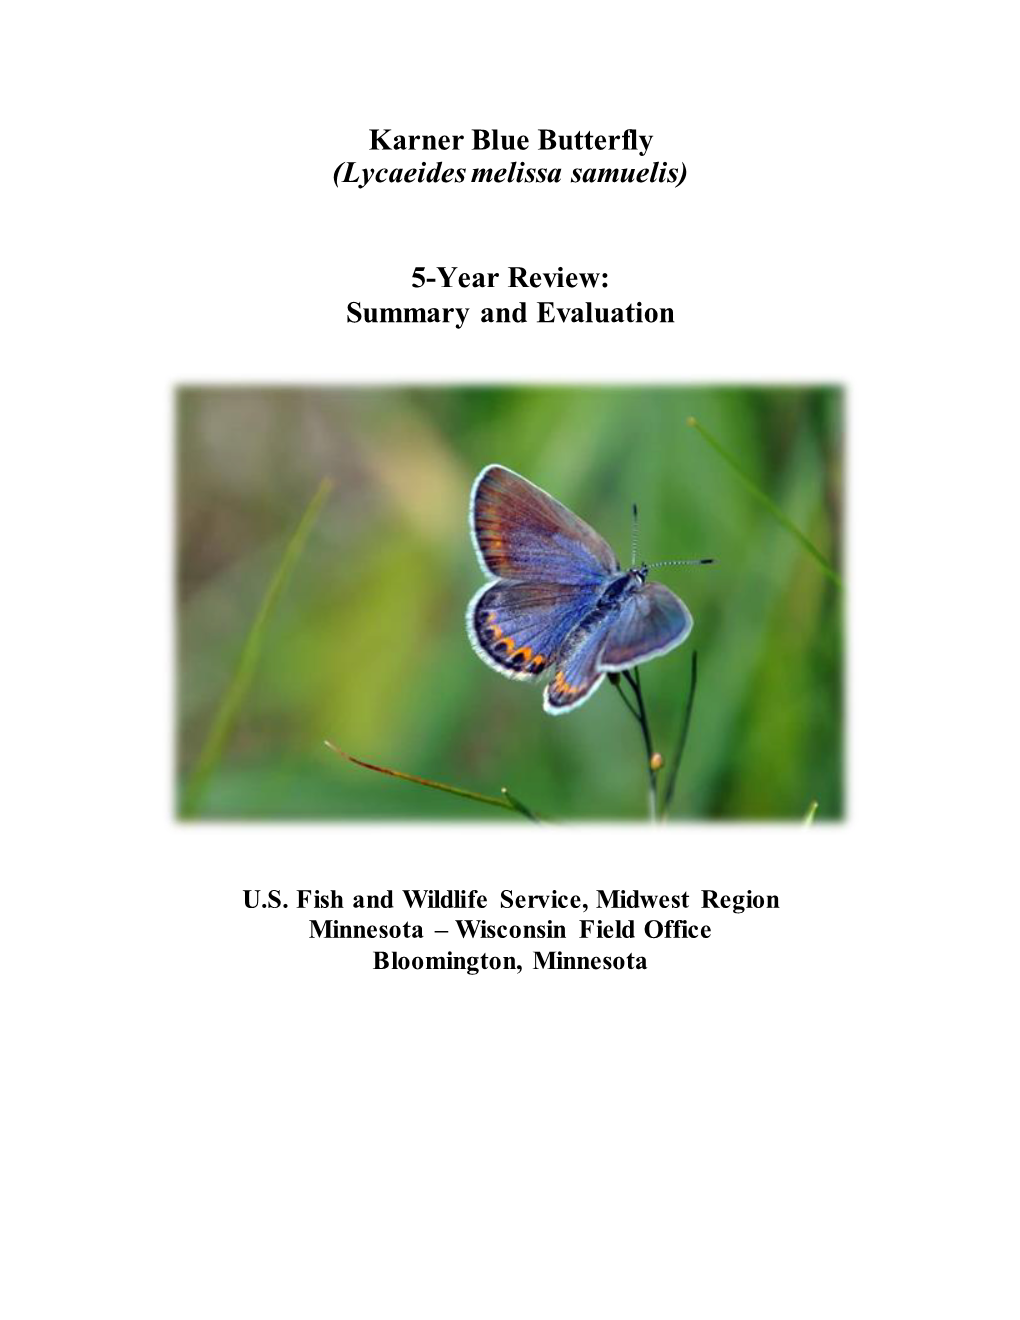 Karner Blue Butterfly (Lycaeides Melissa Samuelis) 5-Year Review: Summary and Evaluation